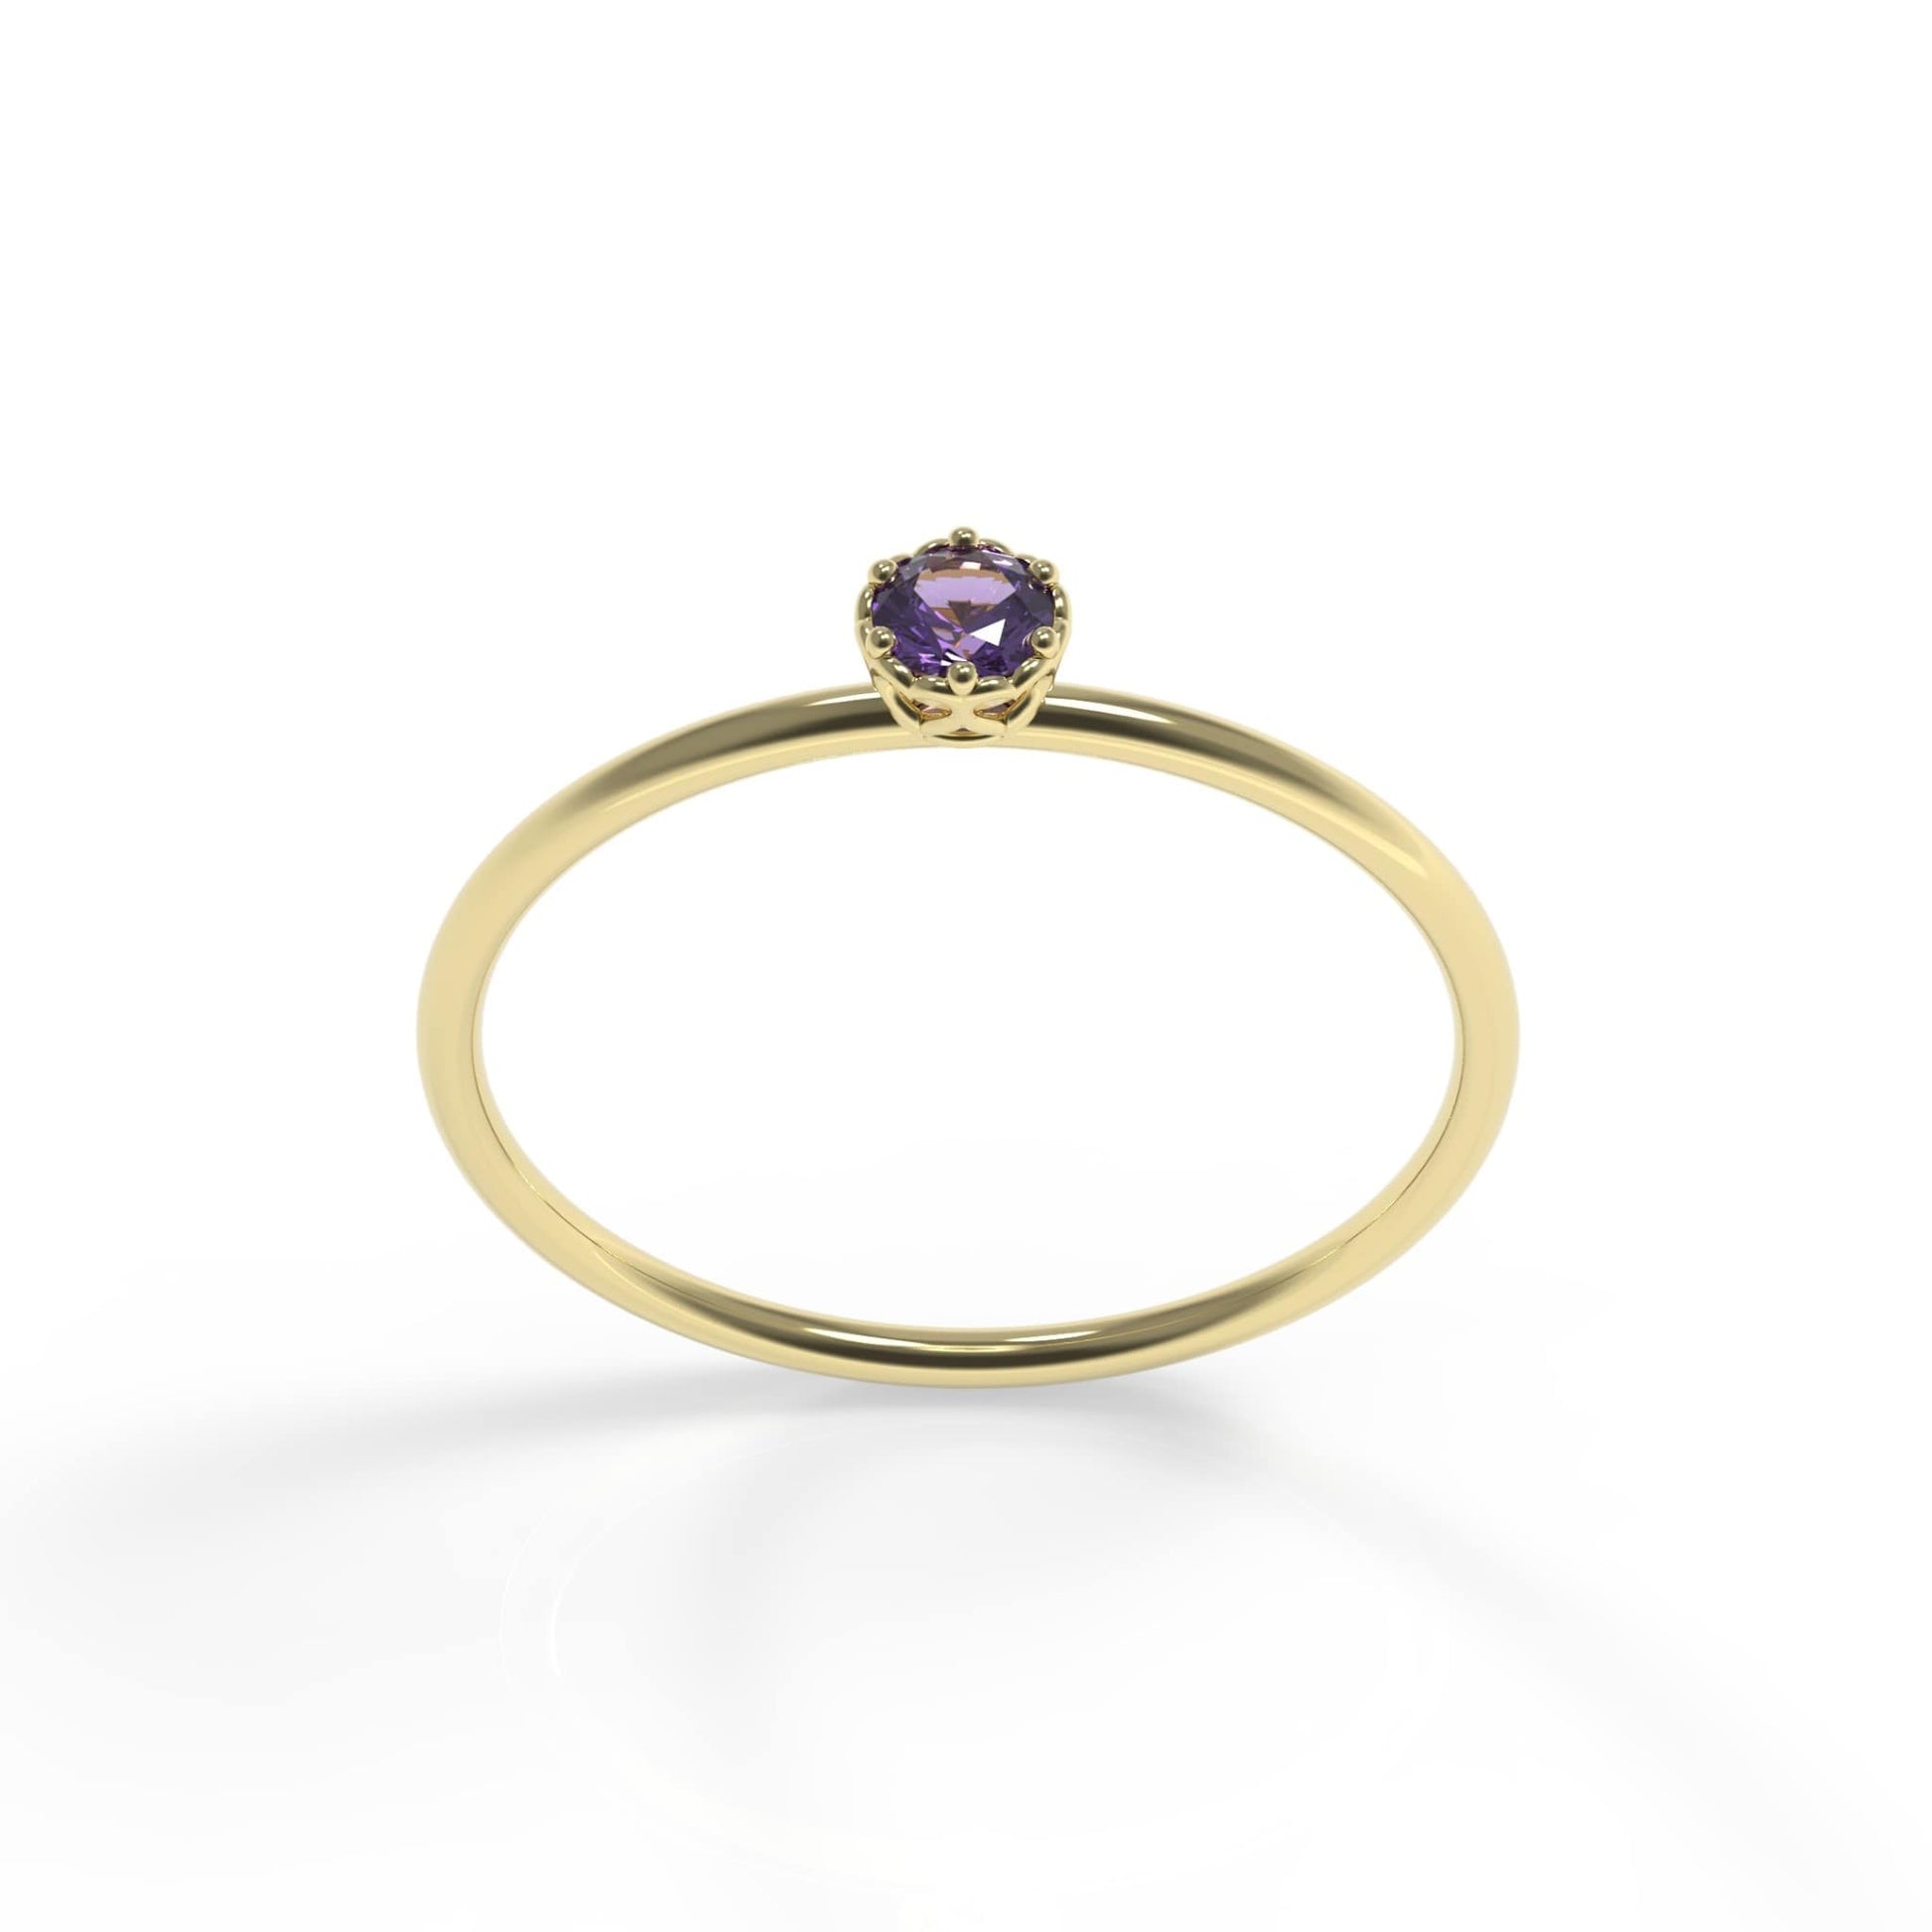 Ring with Amethyst Stone